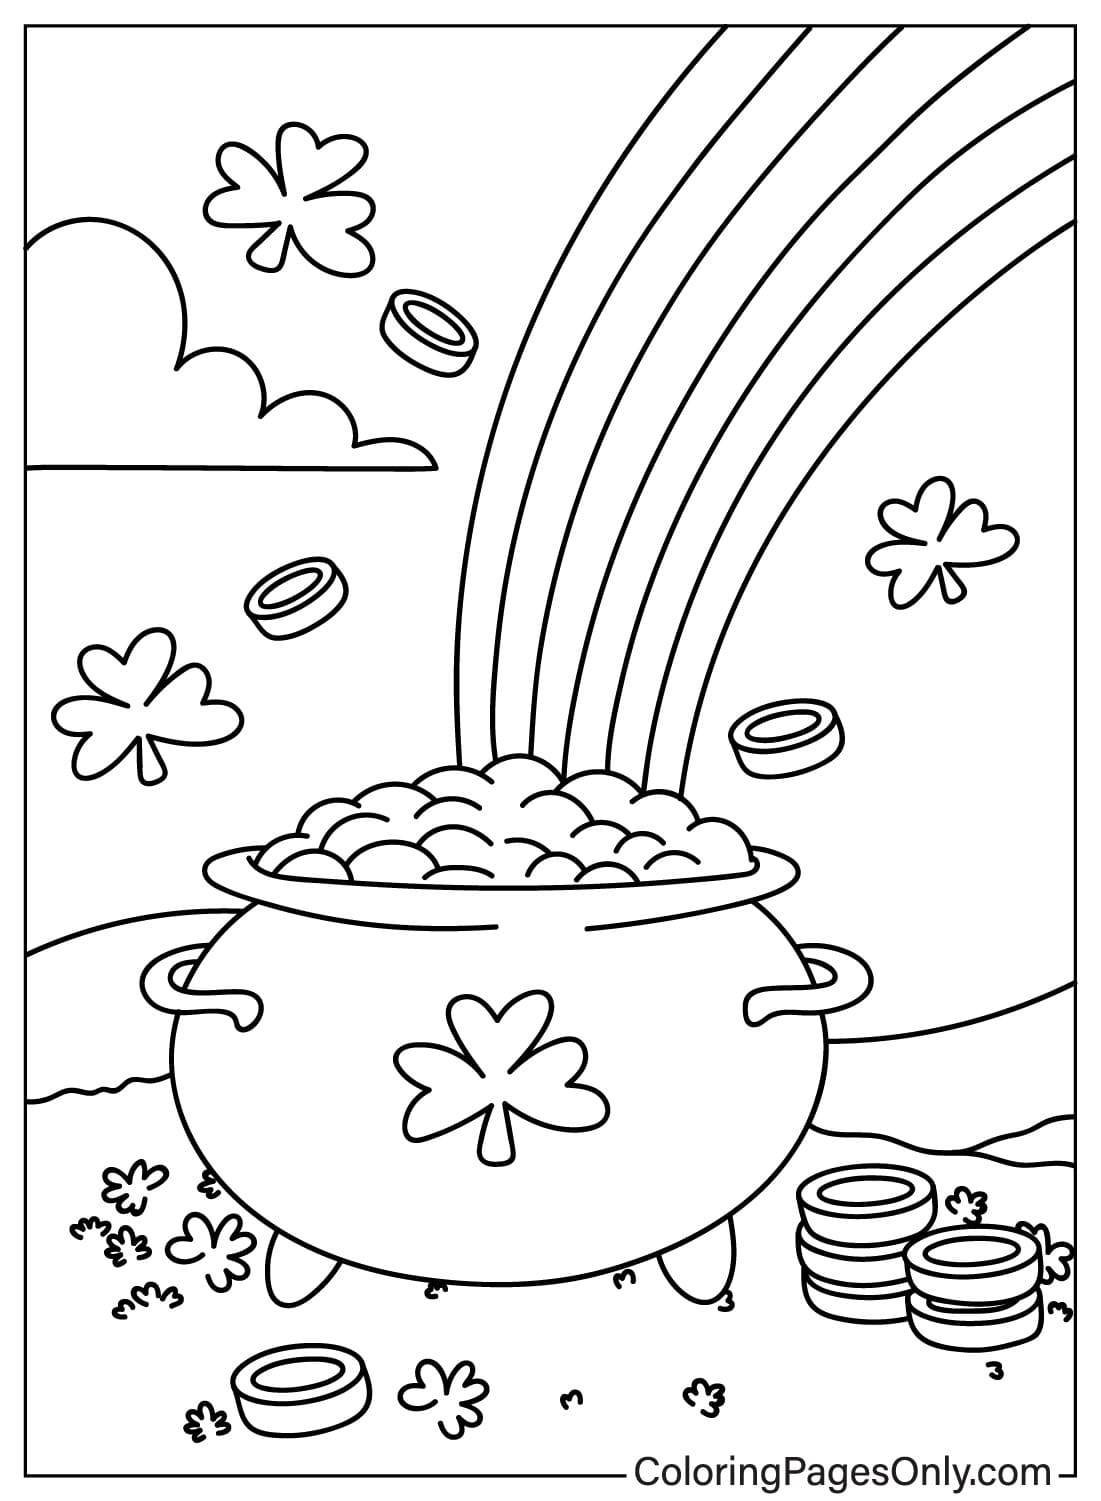 Print Pot of Gold Coloring Page